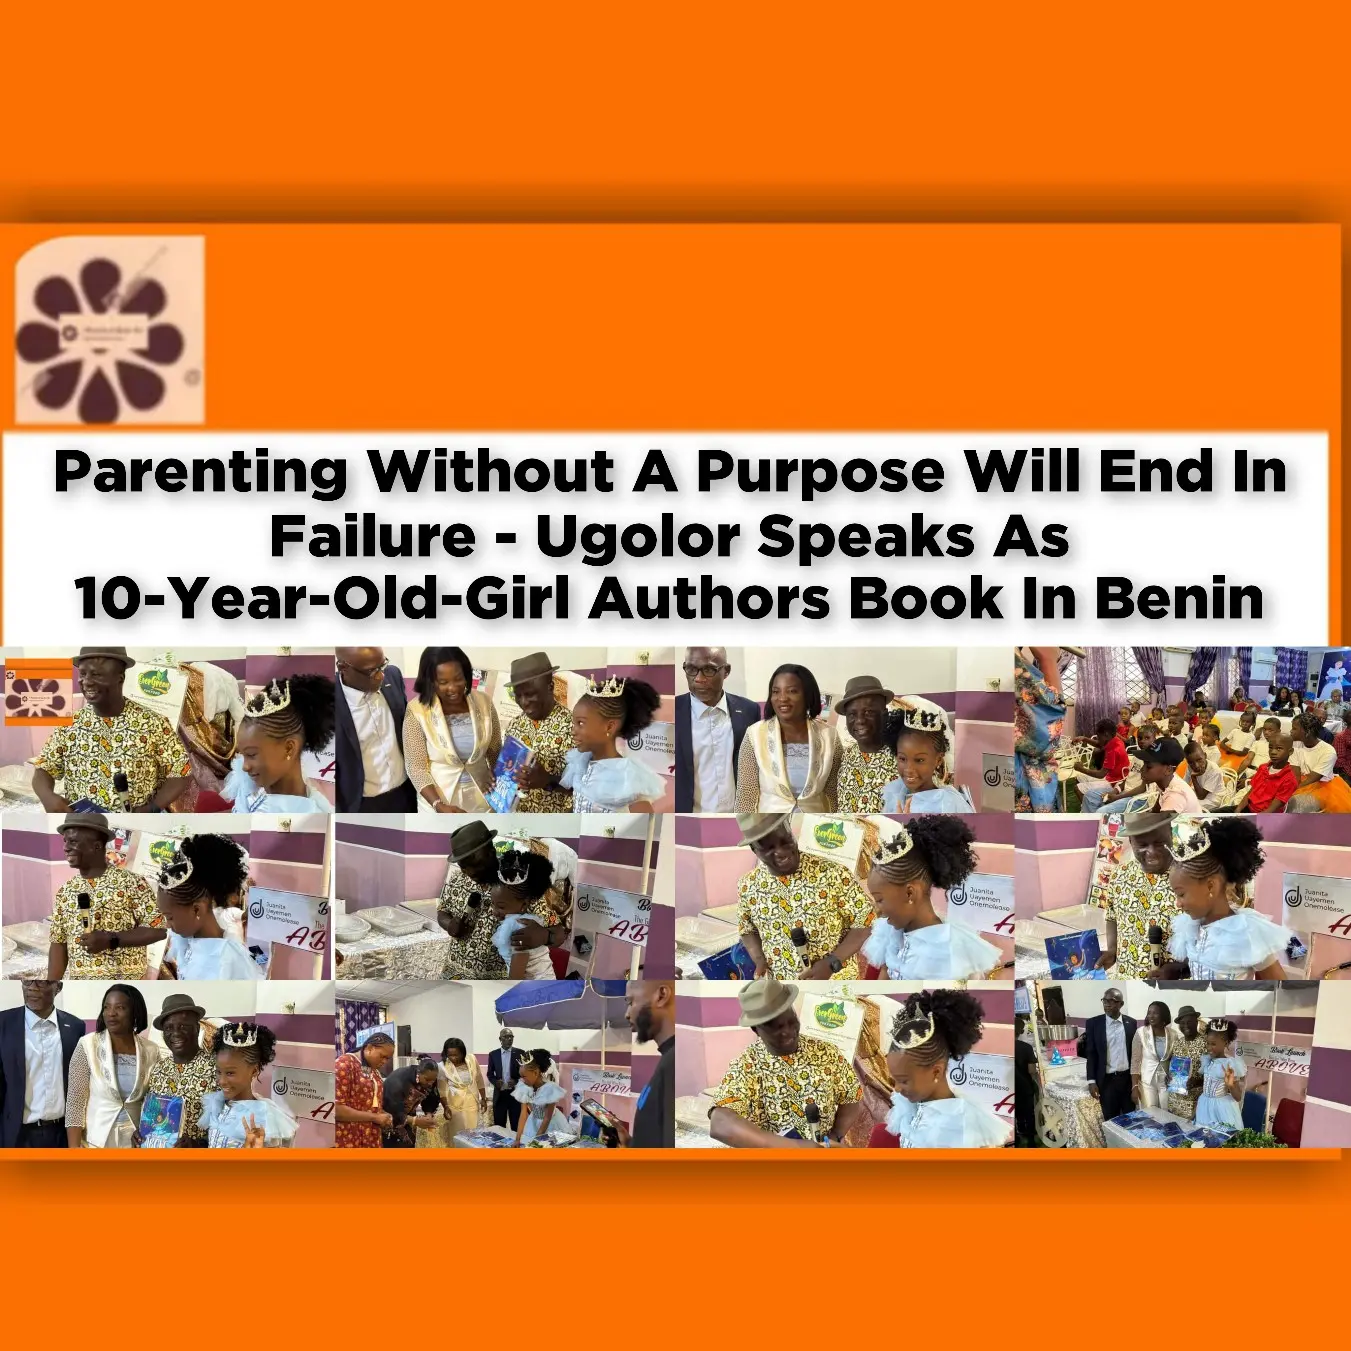 Parenting Without A Purpose Will End In Failure - Ugolor Speaks As 10-Year-Old-Girl Authors Book In Benin ~ OsazuwaAkonedo #Abubakar